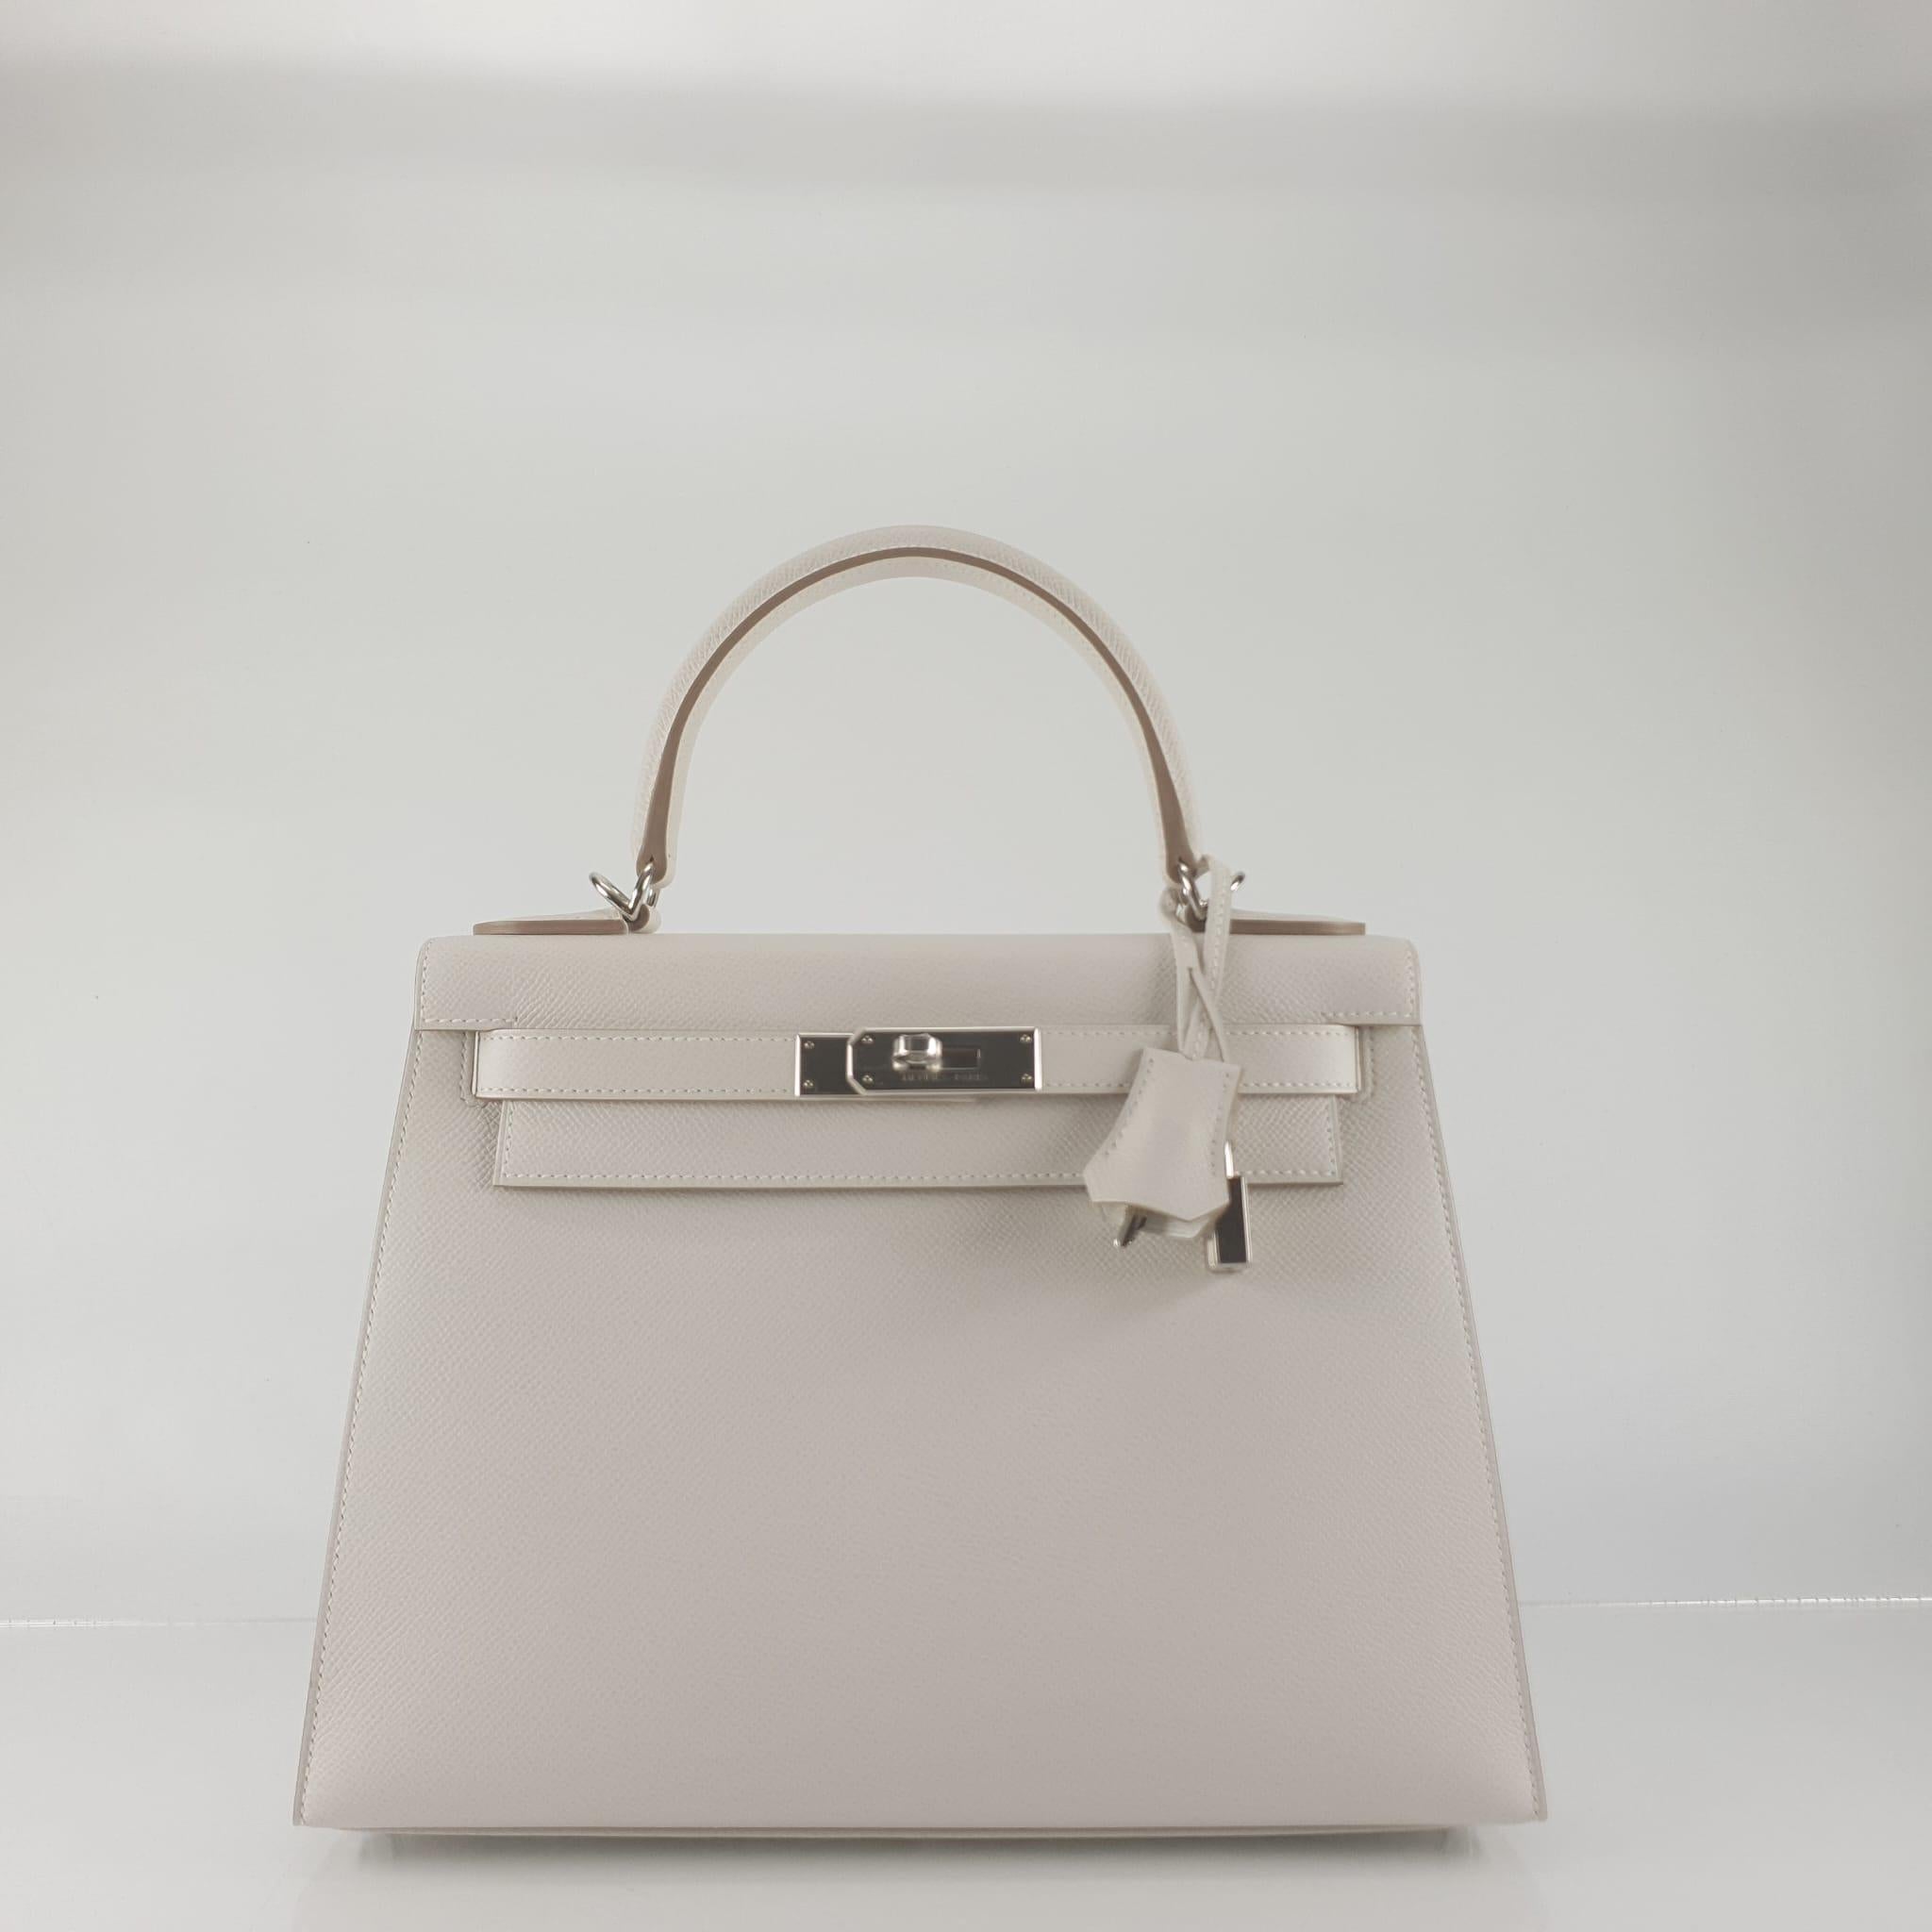 Hermès Kelly II Sellier 28 Gris Pale Epsom Palladium hardware 2023 -Brand New in Box
Includes full set with: lock, two keys, clochette, clochette dust bag, care booklet, raincoat, dust bag and box